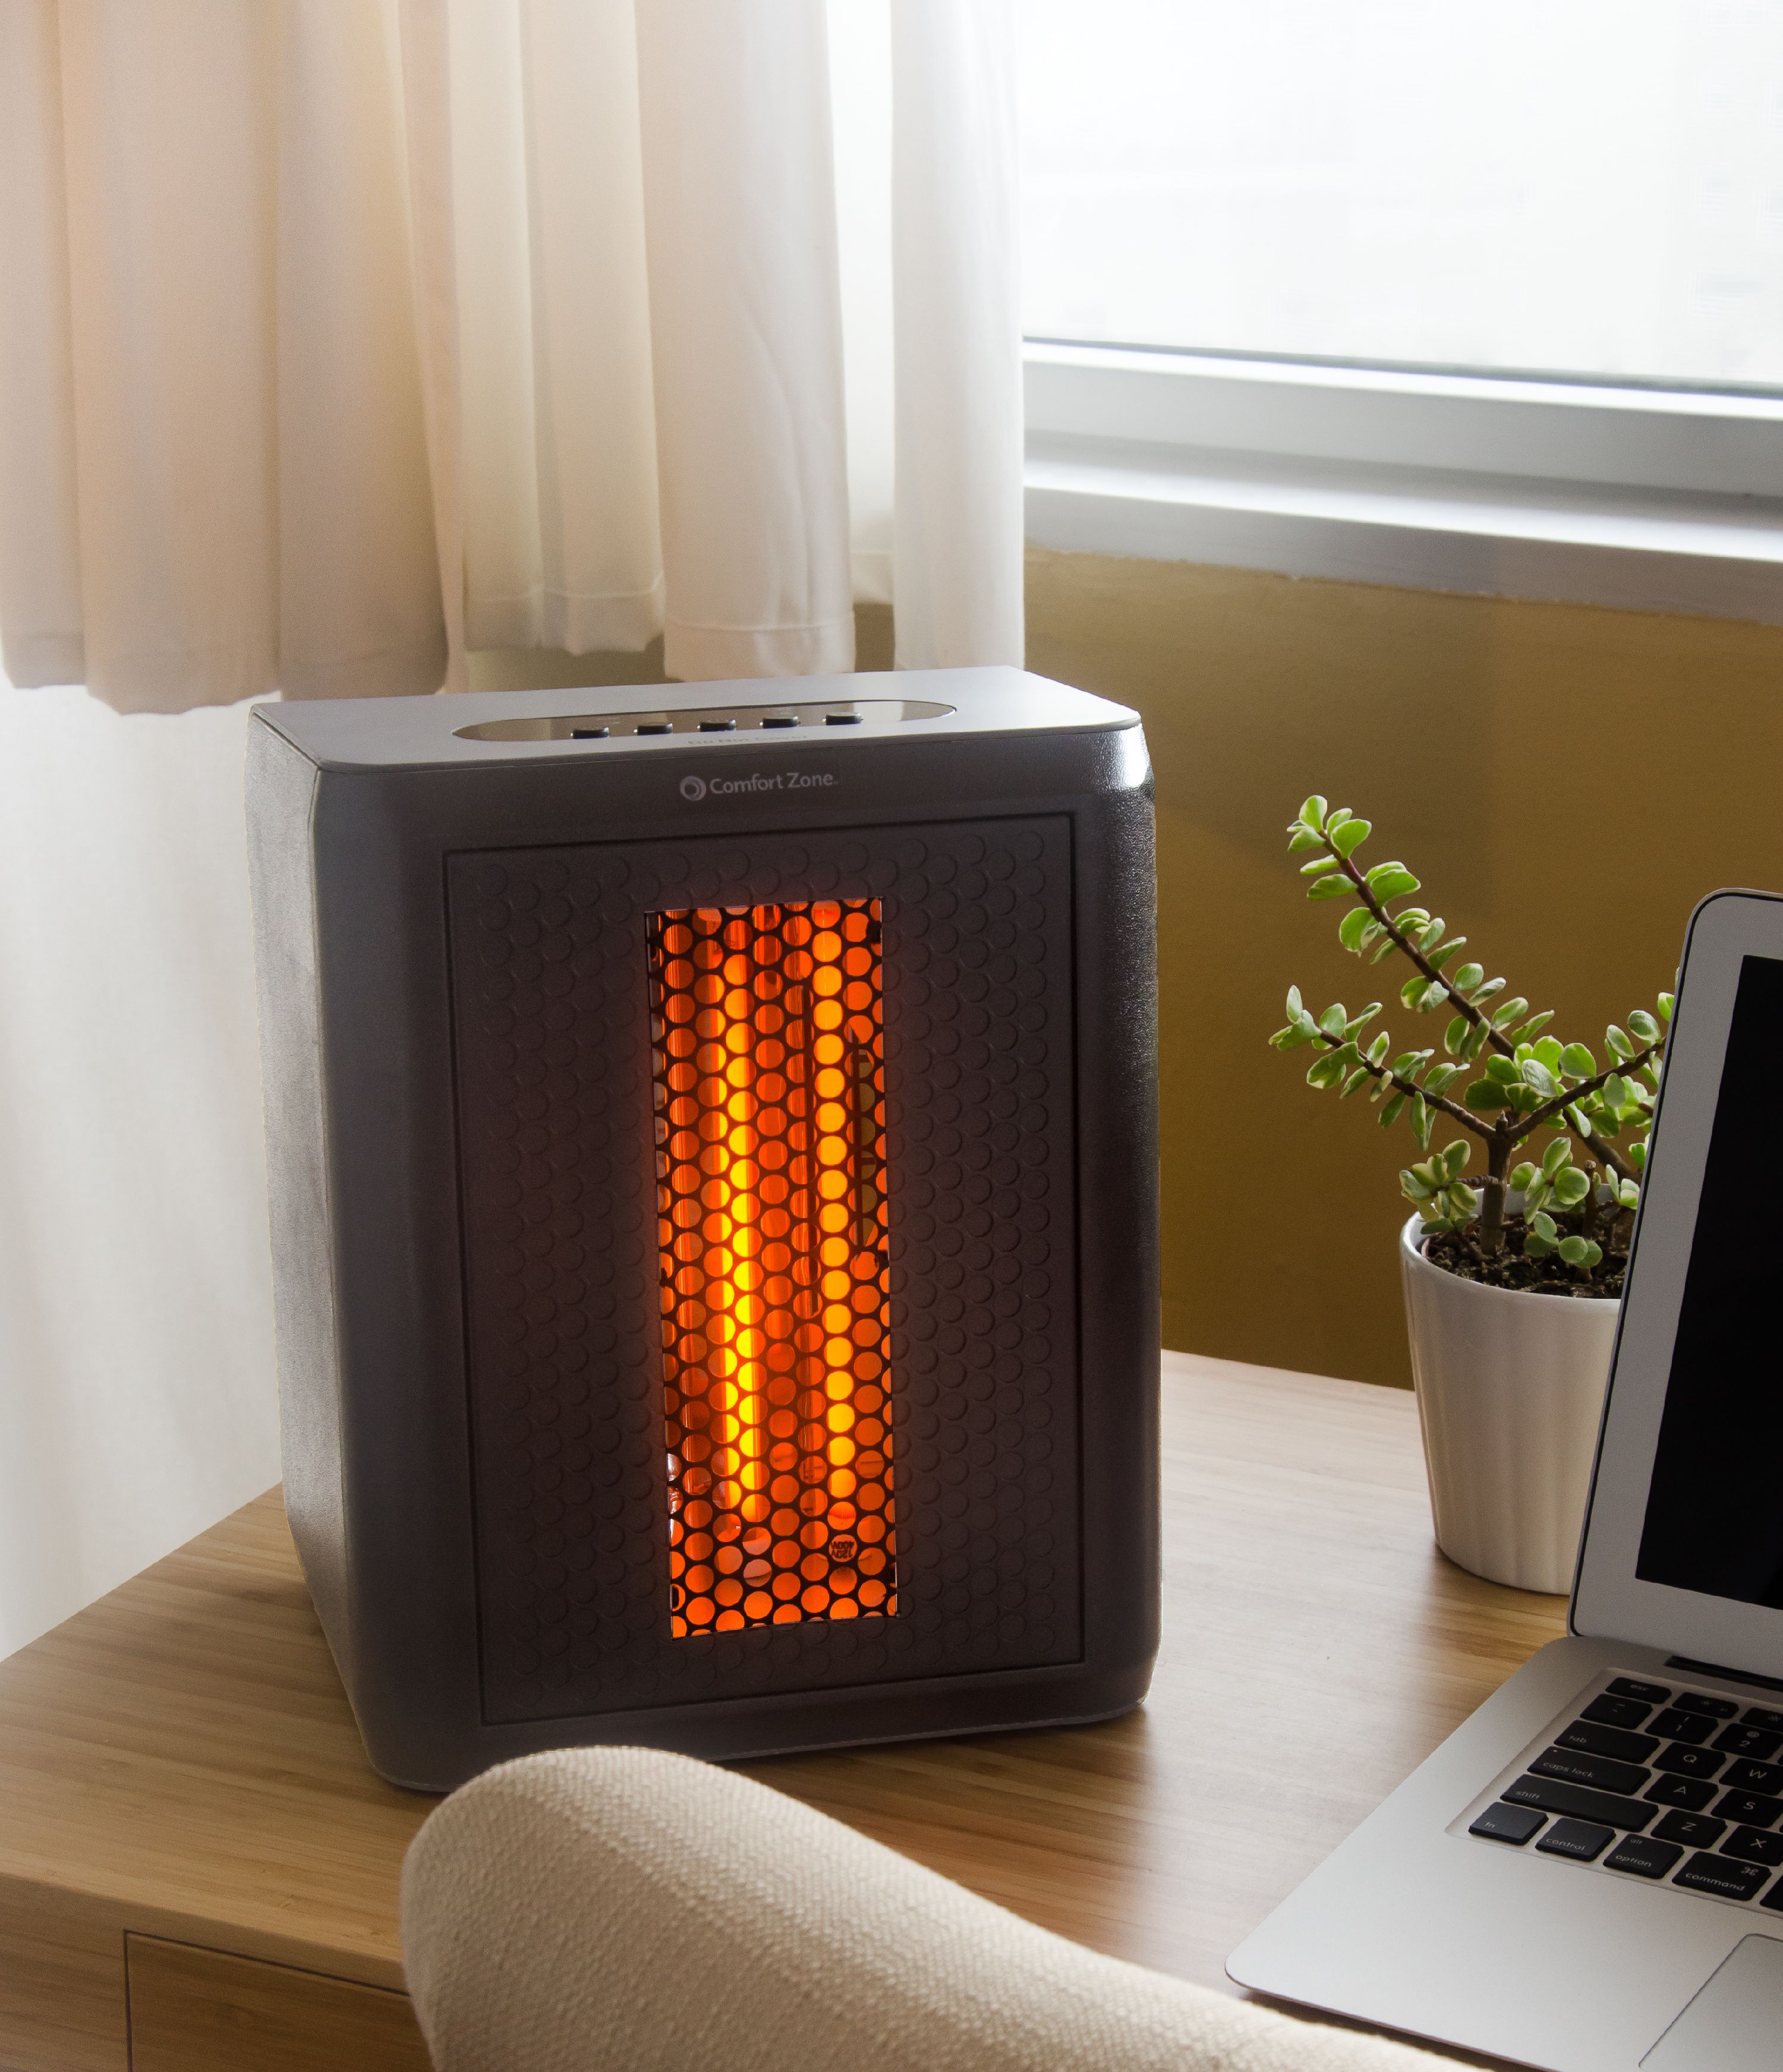 Comfort Zone Infrared Electric Portable Desktop Space Heater, Black - image 4 of 4